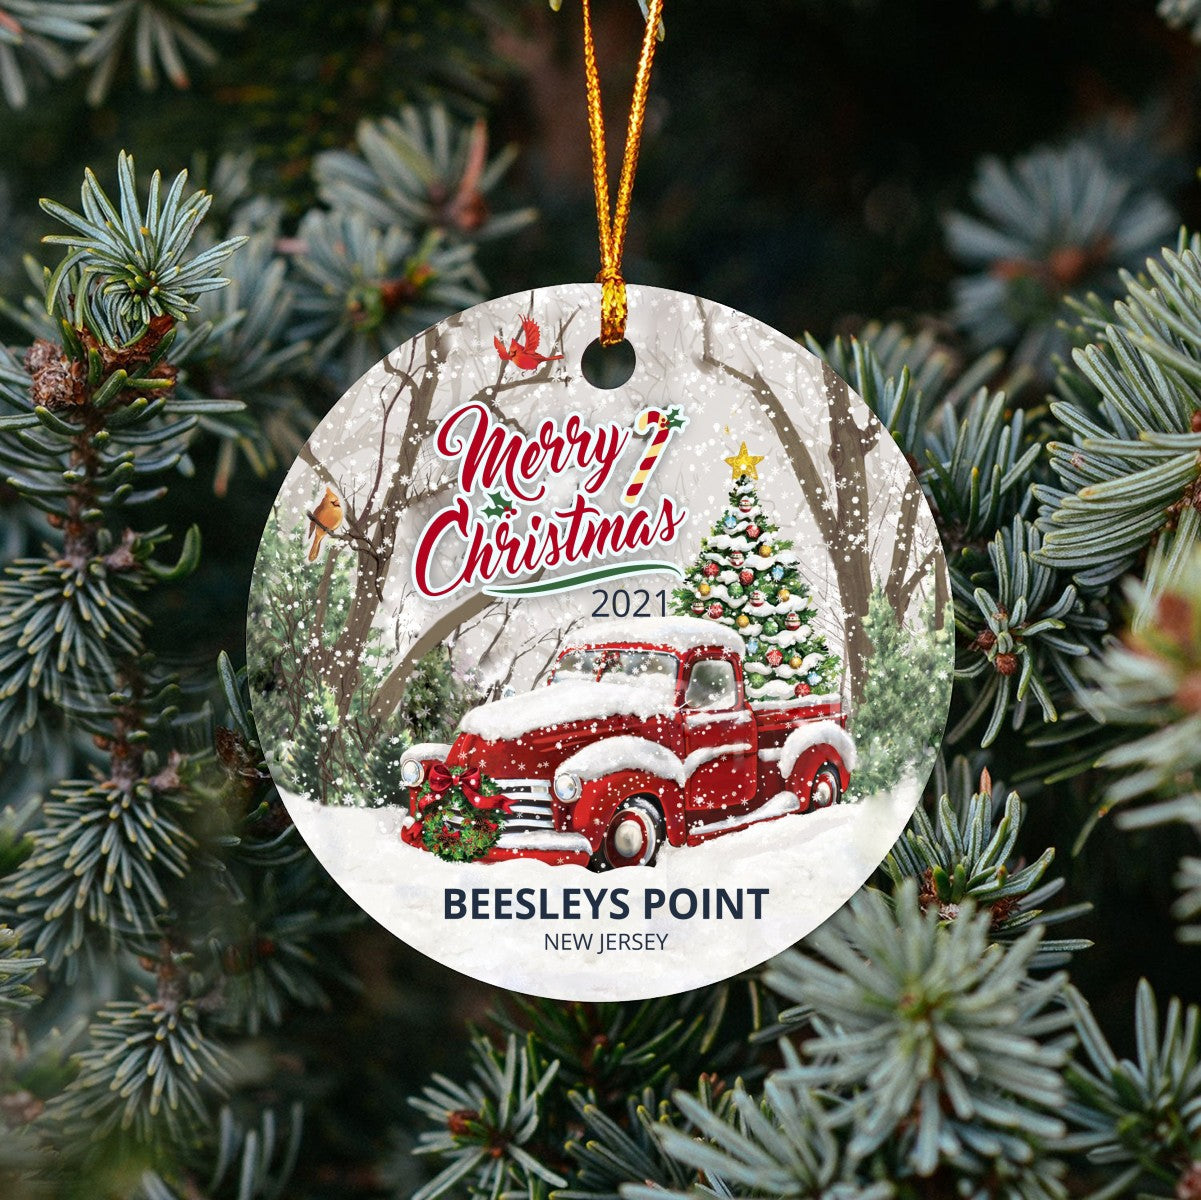 Christmas Tree Ornaments Beesleys Point - Ornament With Name City, State Beesleys Point New Jersey NJ Ornament - Red Truck Xmas Ornaments 3'' Plastic Gift For Family, Friend And Housewarming